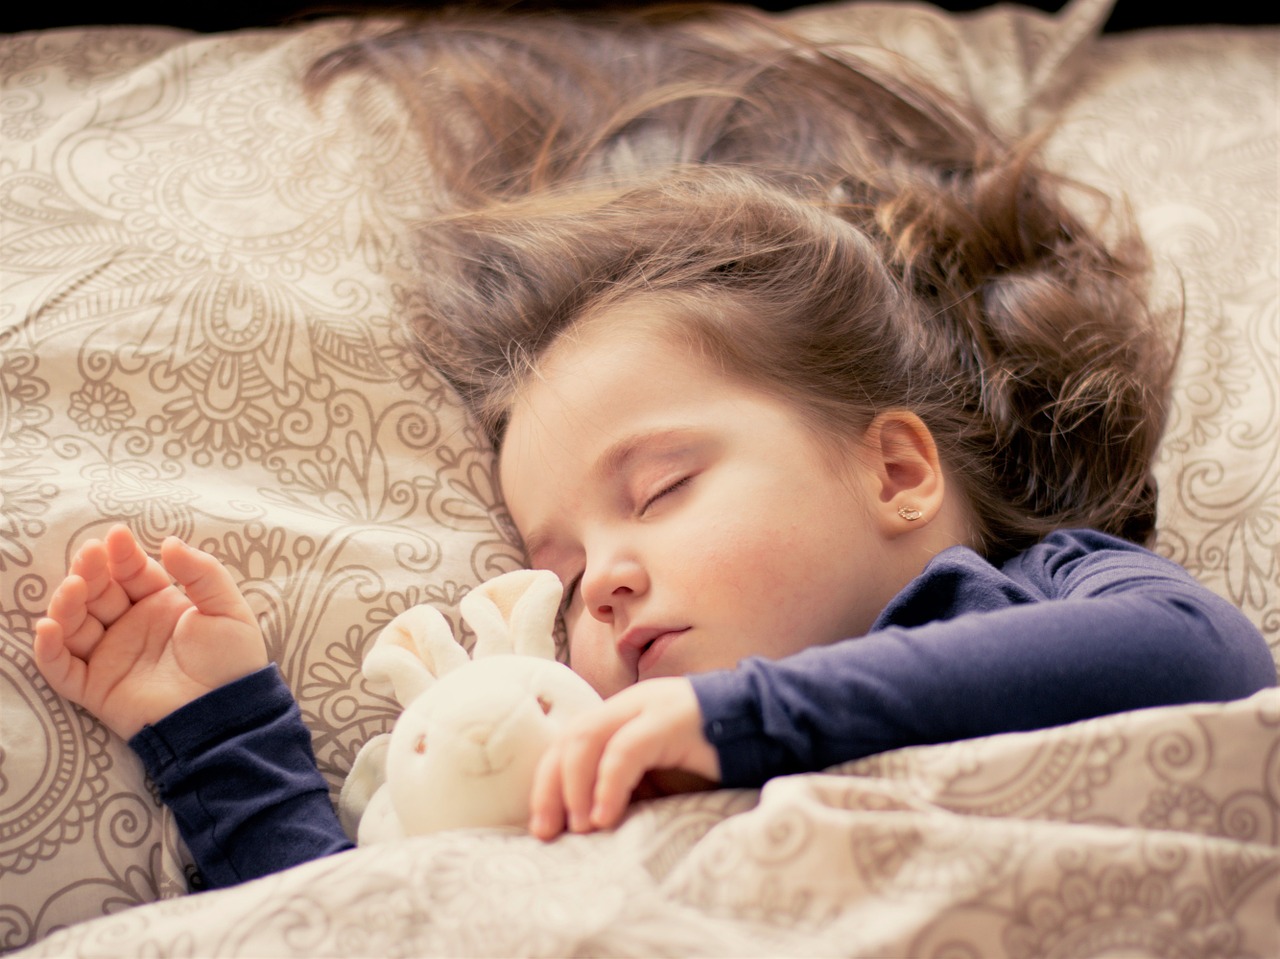 Sick of Bedtime Battles? These Tips Could Help!